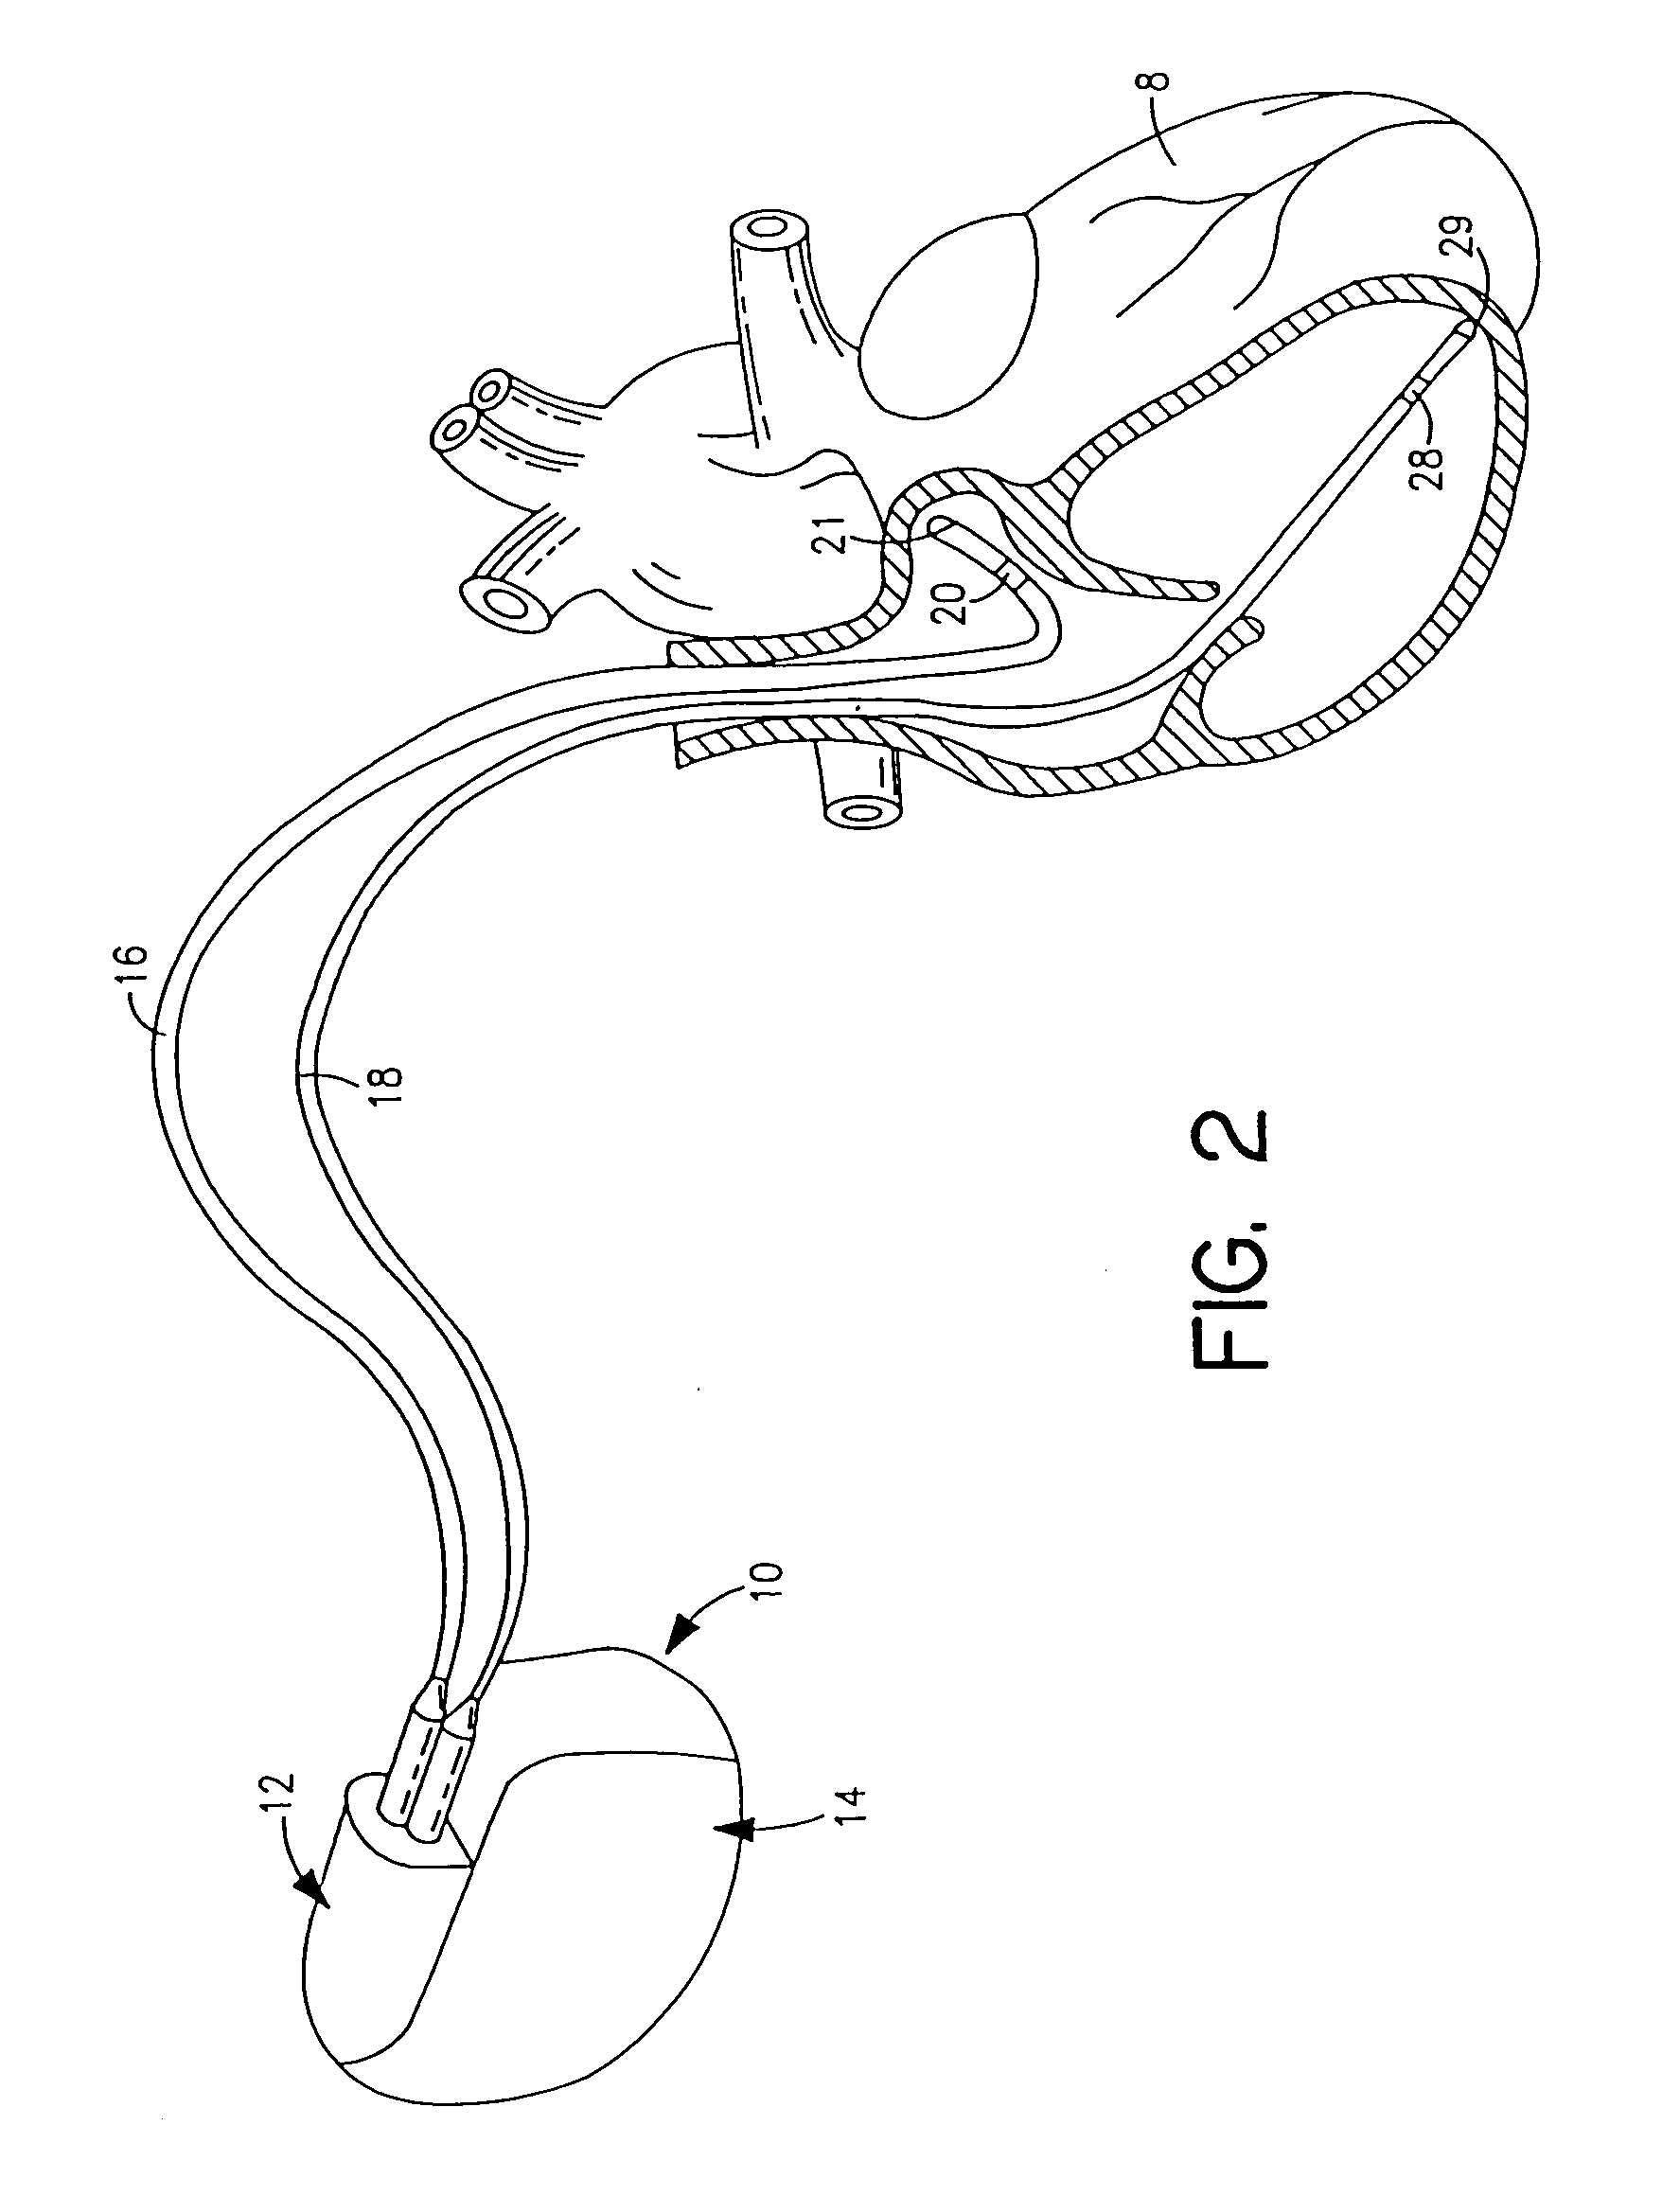 System and method for remote programming of an implantable medical device